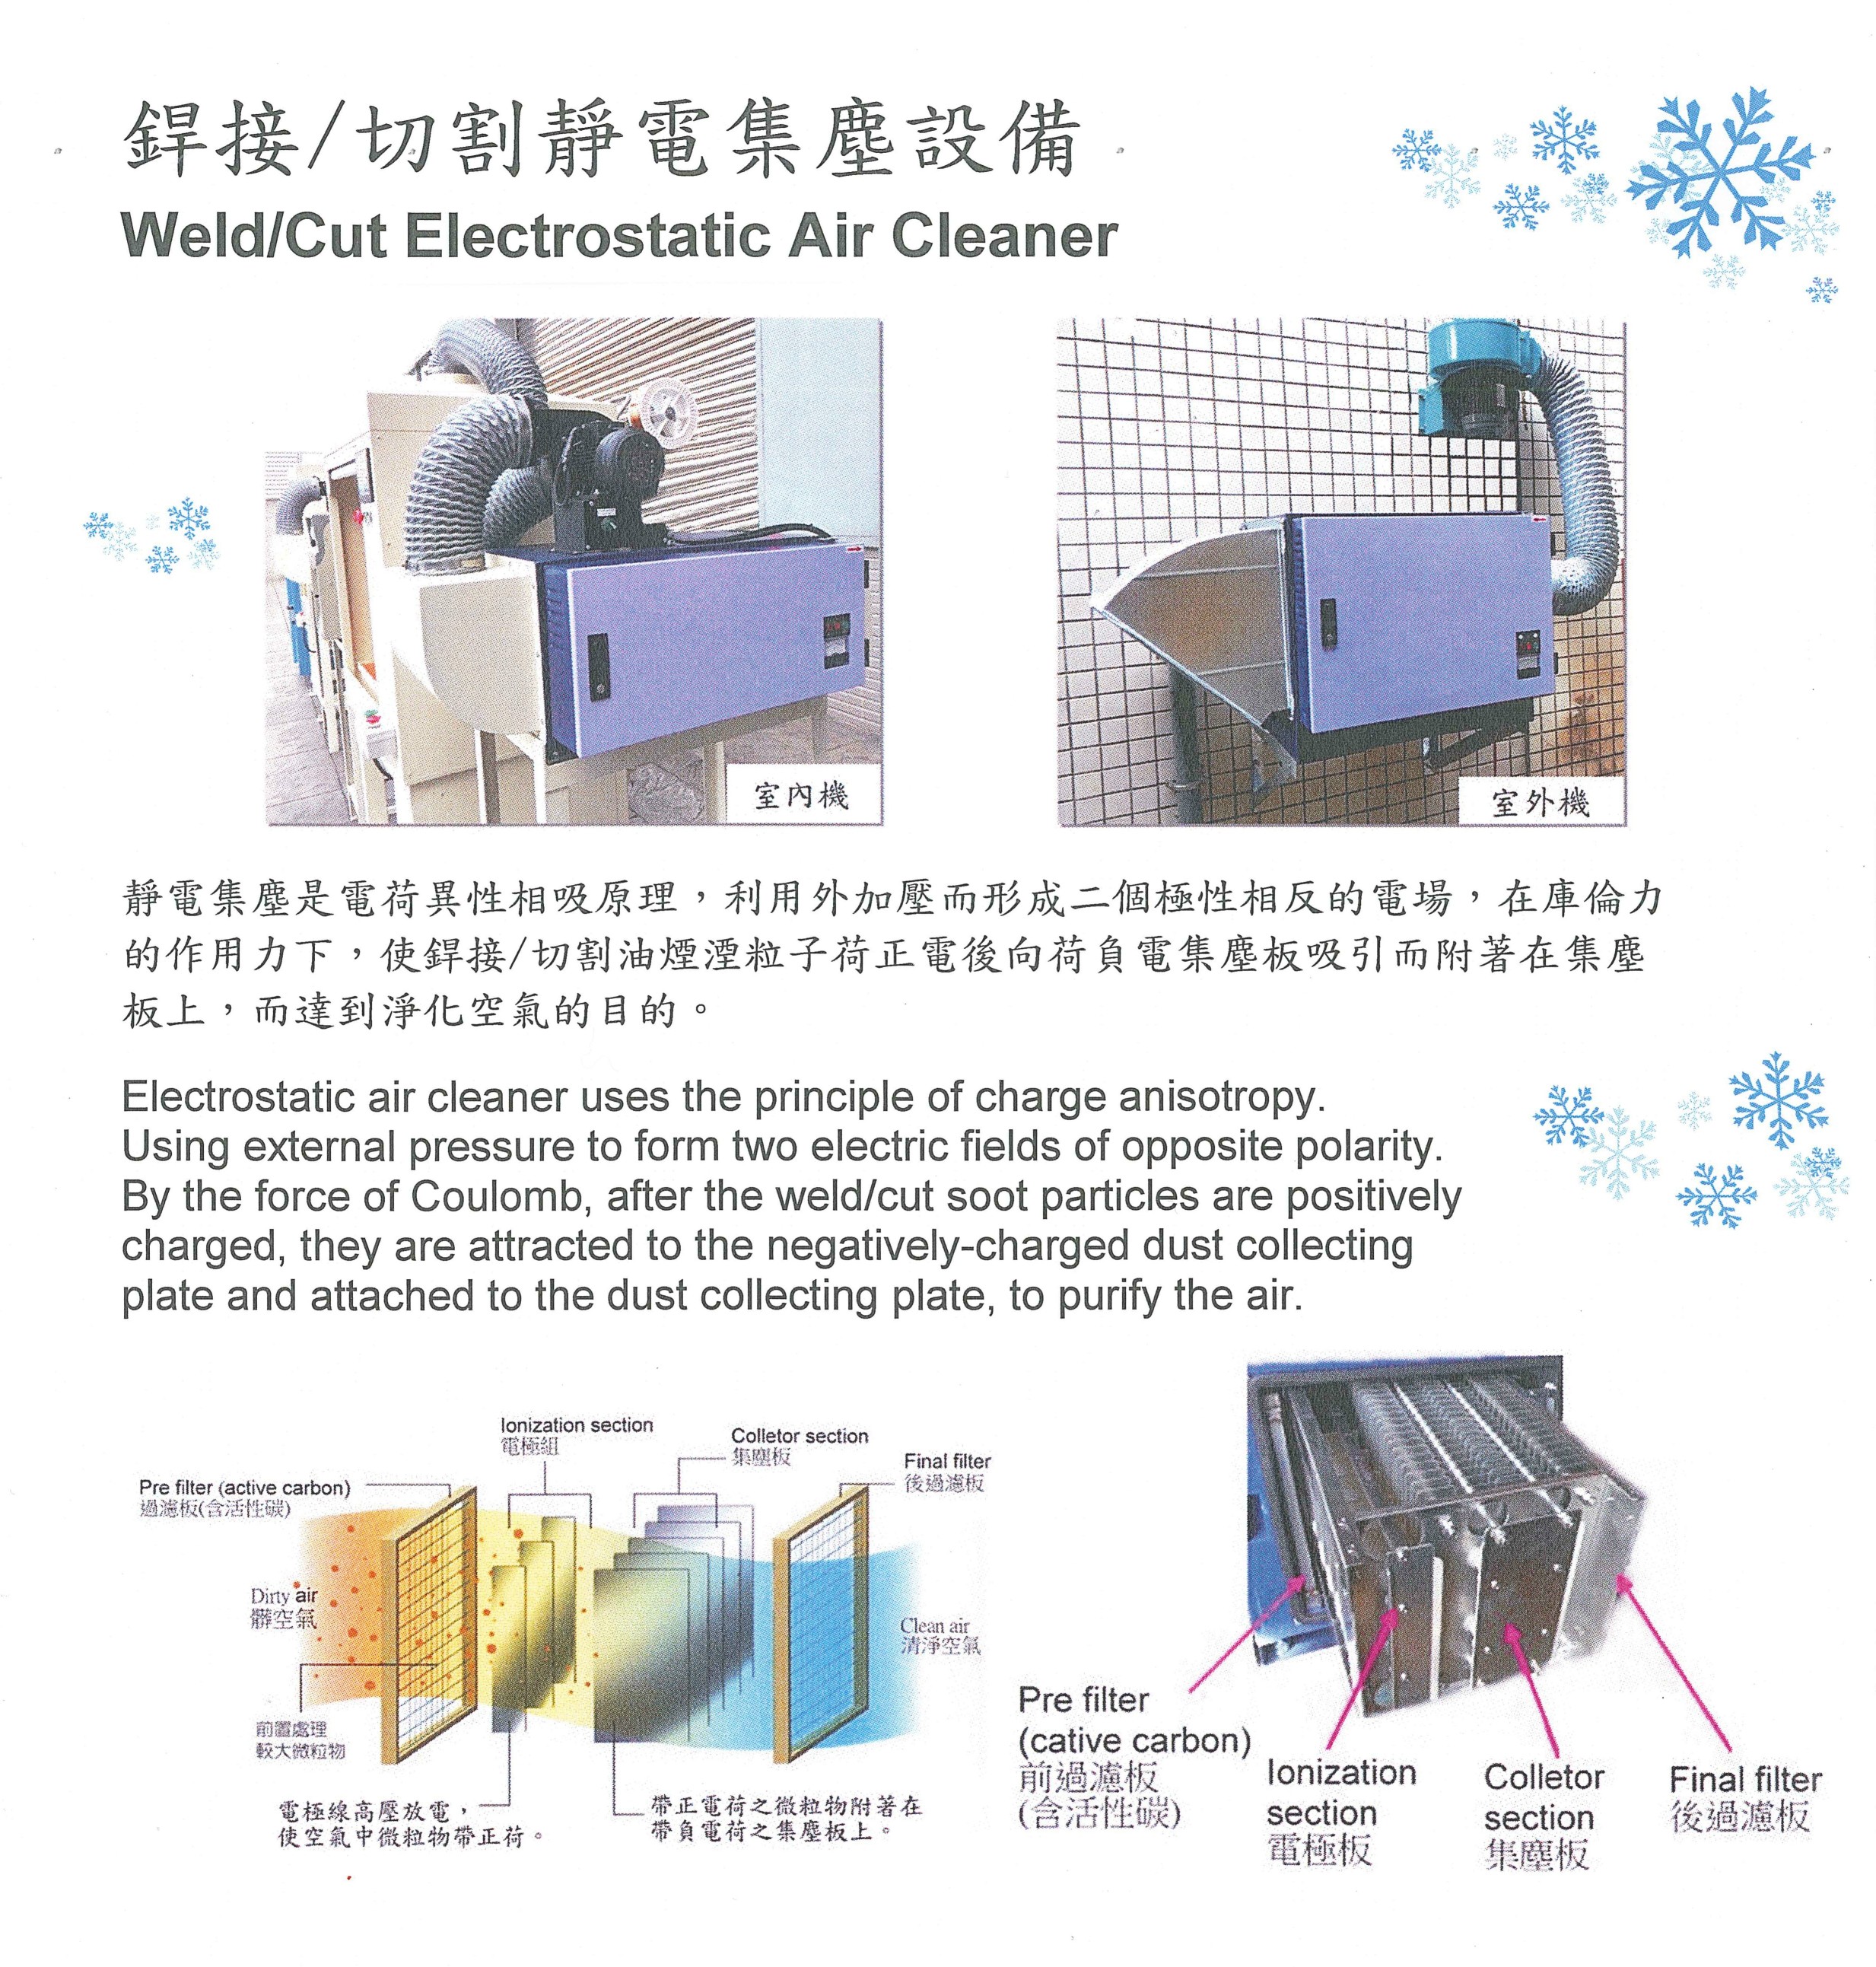 Welding/Cutting Electrostatic Air Cleaner